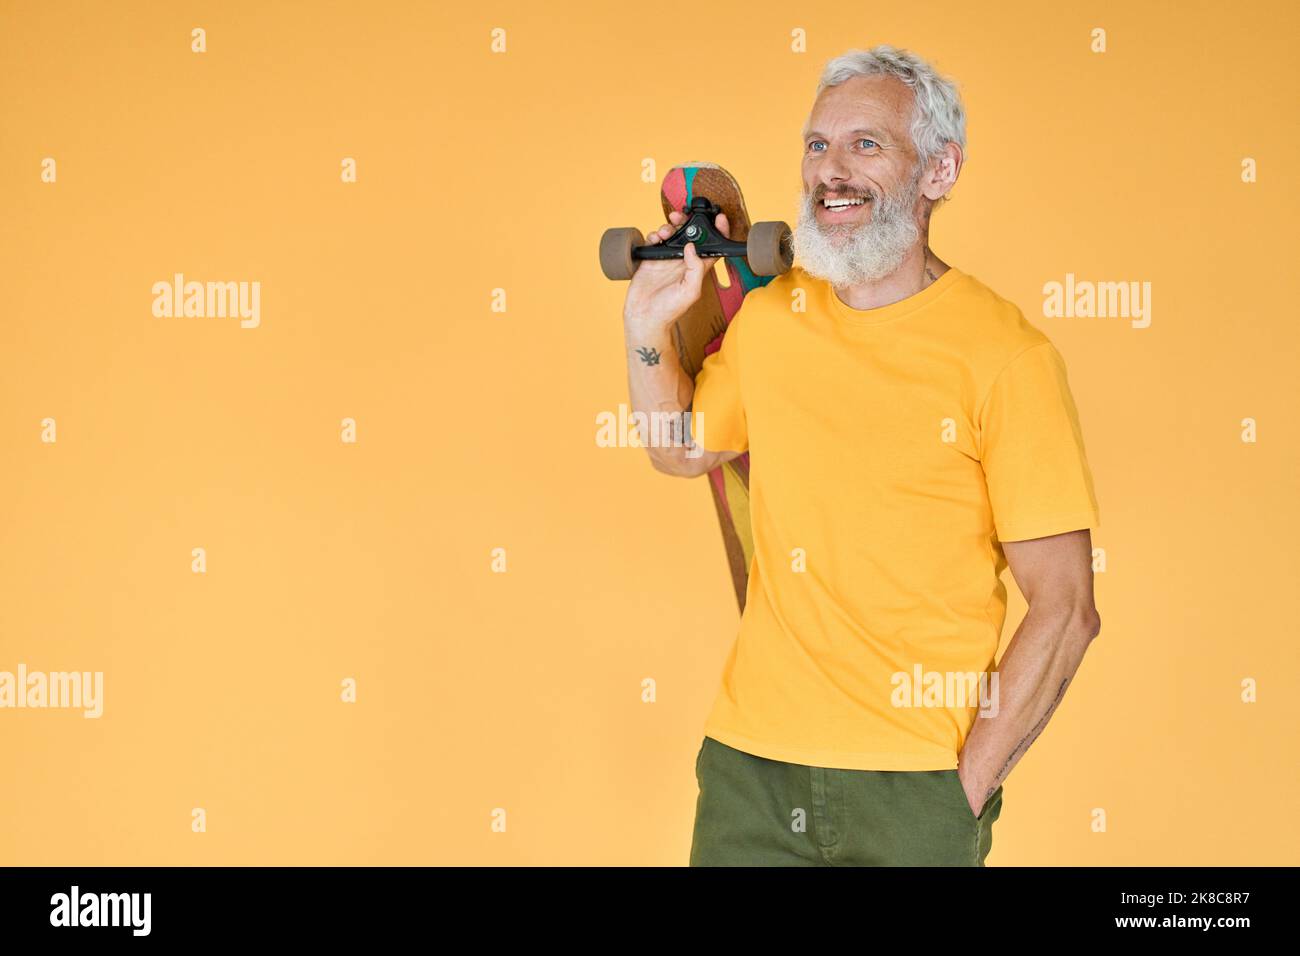 Happy bearded old man skater holding skateboard standing isolated on yellow. Stock Photo